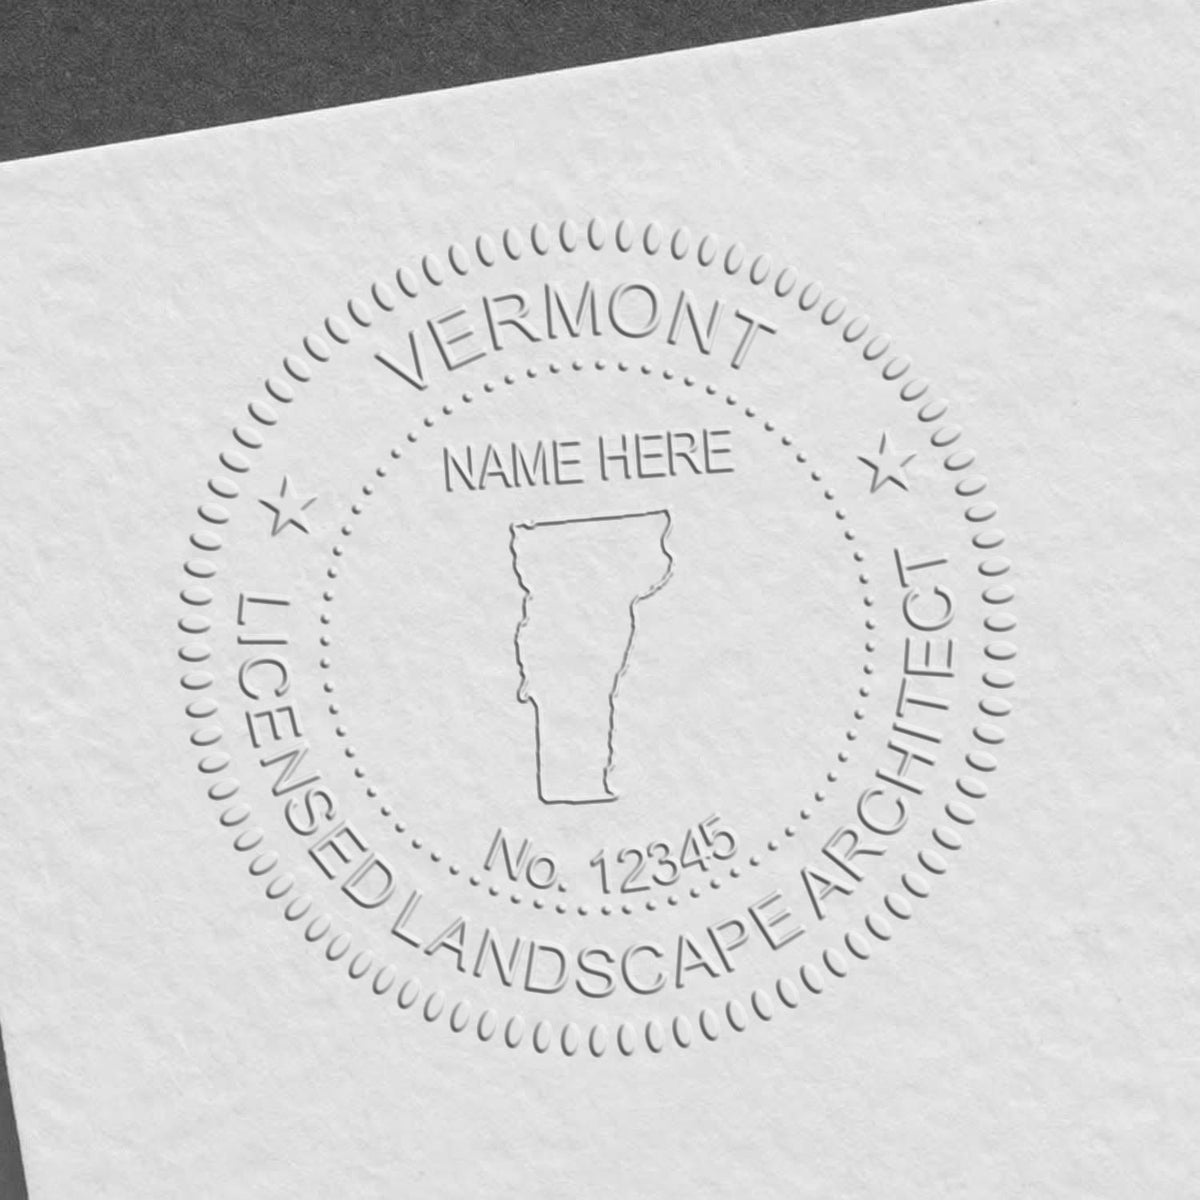 The Gift Vermont Landscape Architect Seal stamp impression comes to life with a crisp, detailed image stamped on paper - showcasing true professional quality.